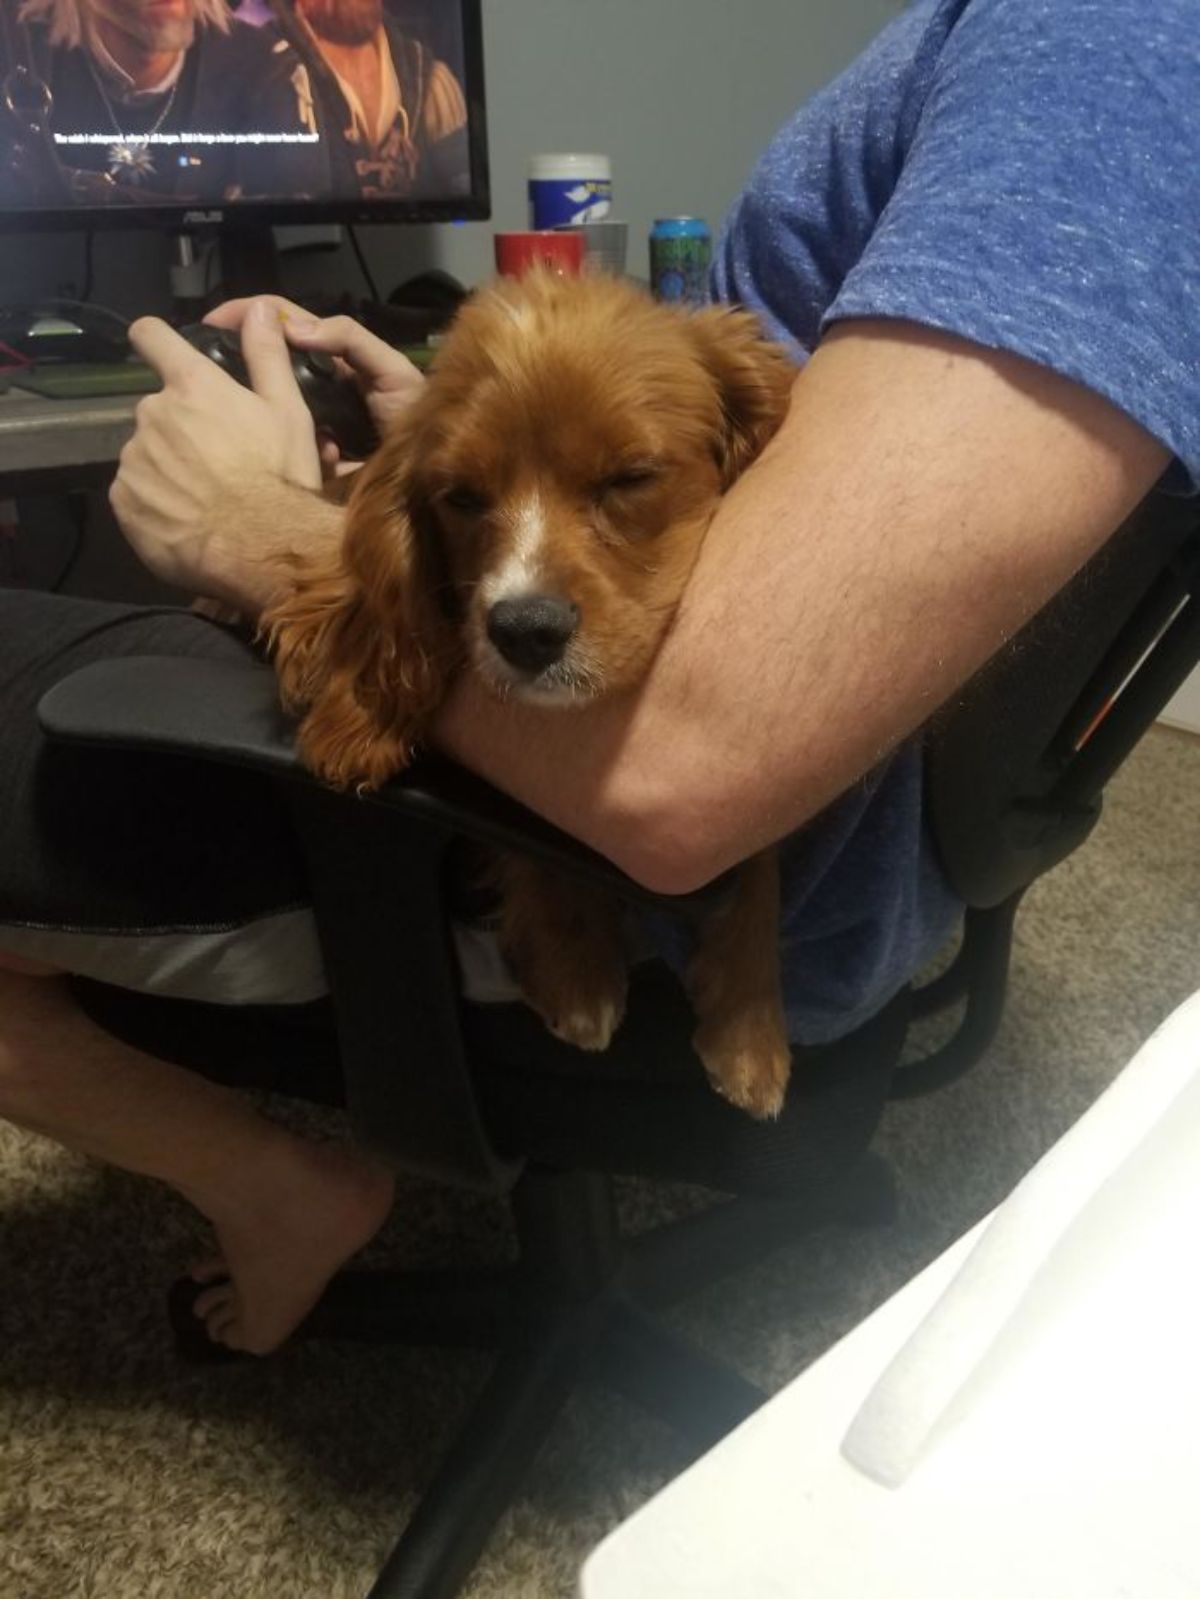 fluffy brown and white dog sleeping in a man's arms while he's playing a video game